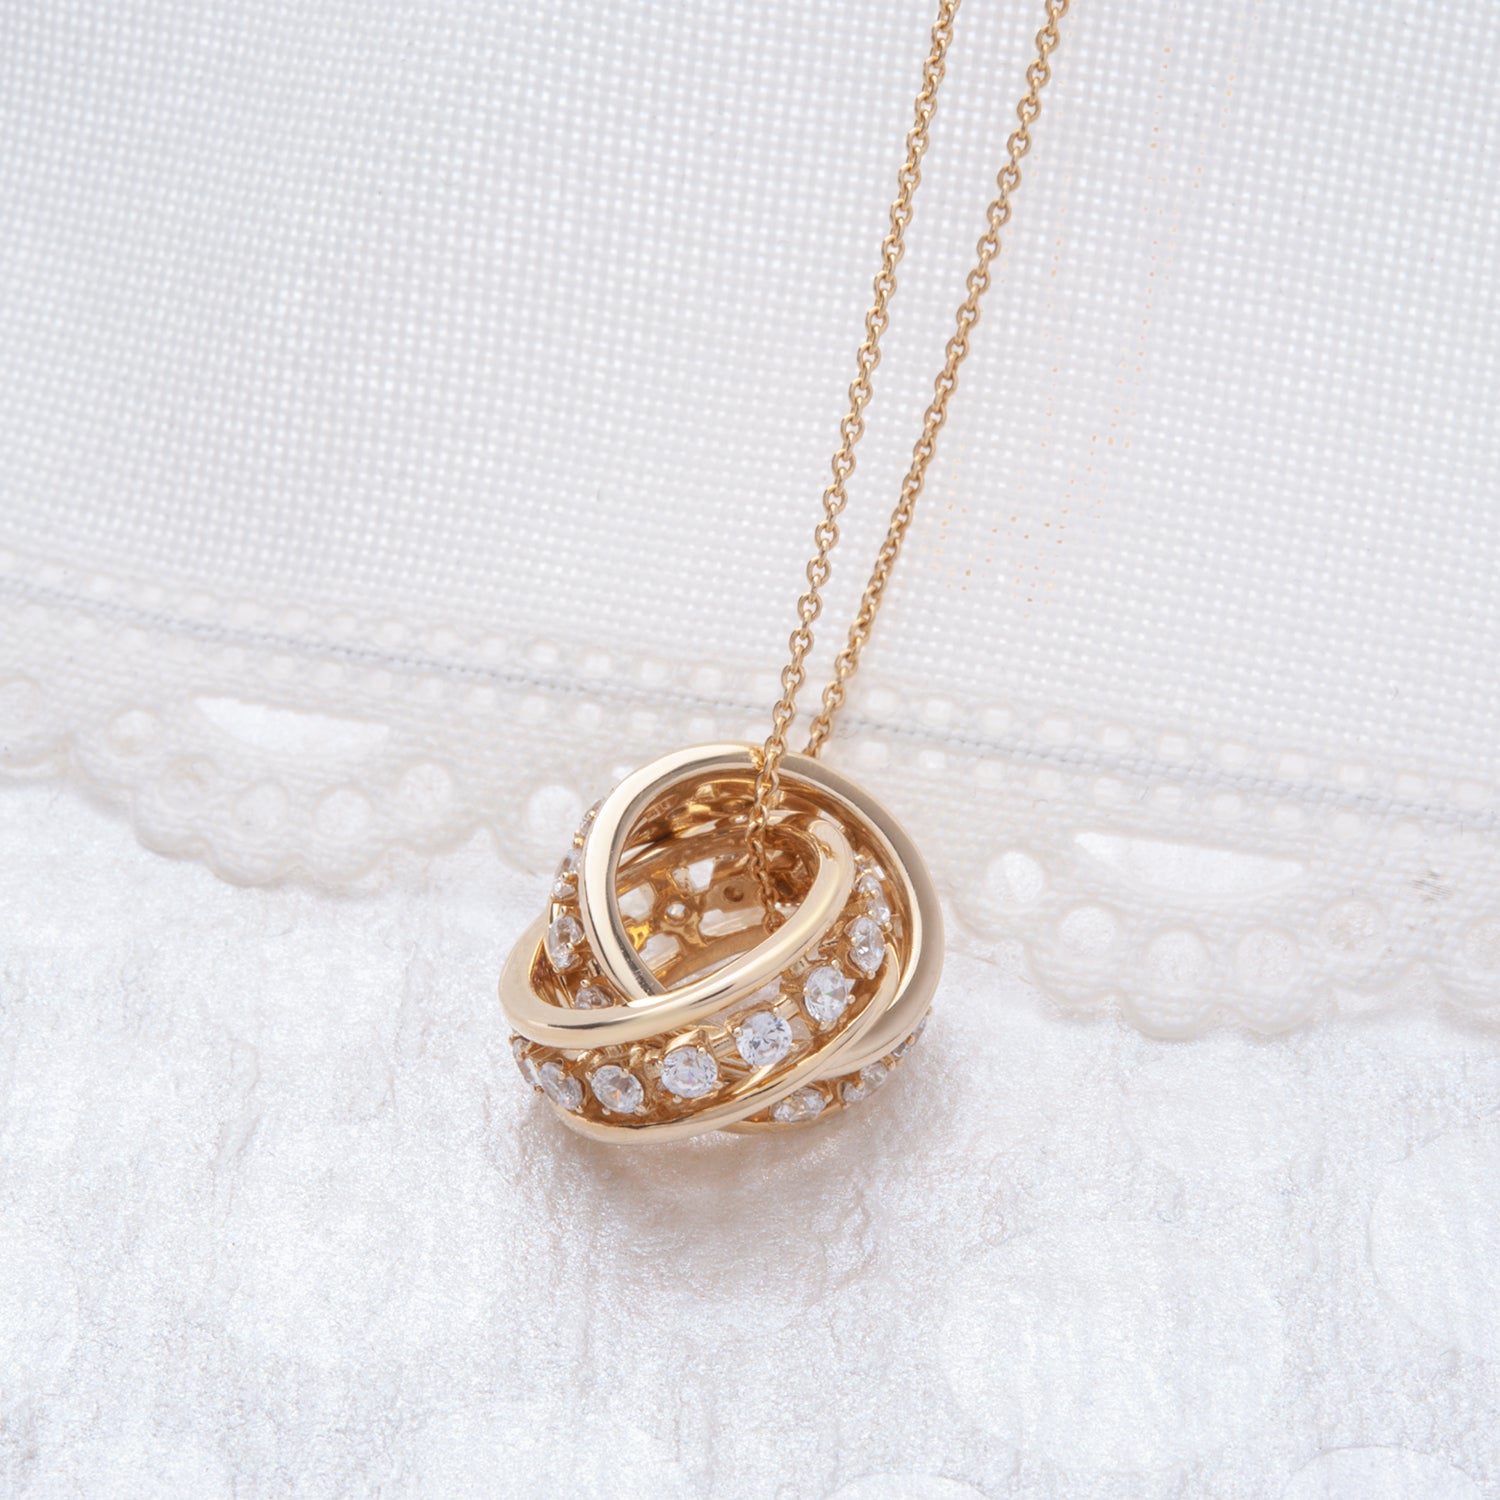 Prystn Pendant in Yellow Gold with Diamonds